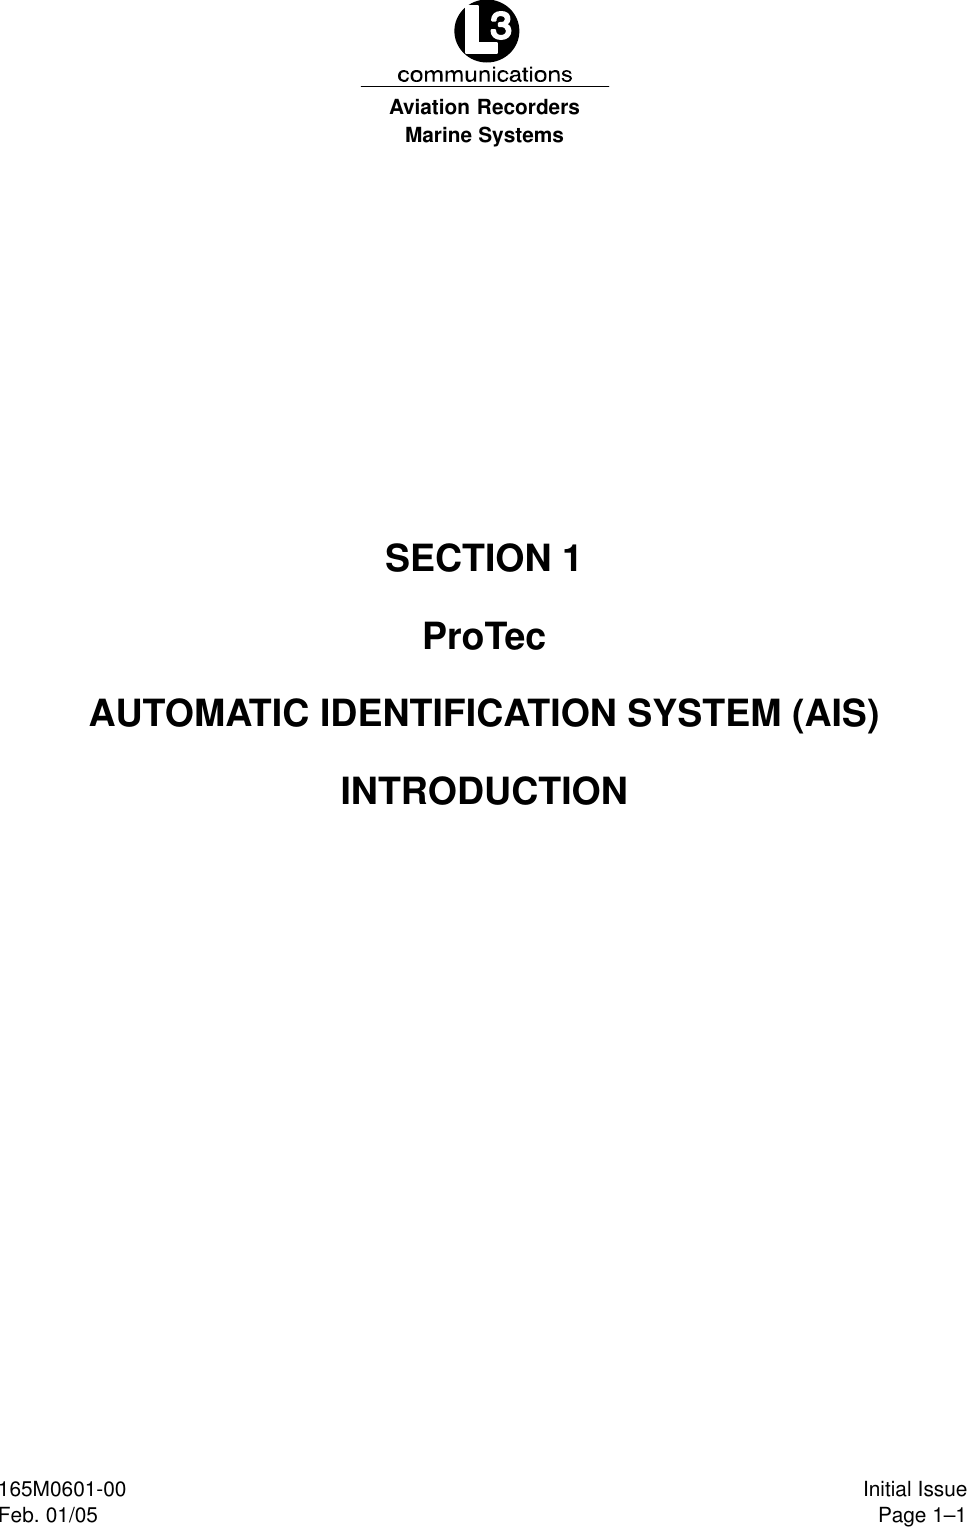 Marine SystemsAviation RecordersPage 1–1Initial Issue165M0601-00Feb. 01/05SECTION 1ProTecAUTOMATIC IDENTIFICATION SYSTEM (AIS)INTRODUCTION